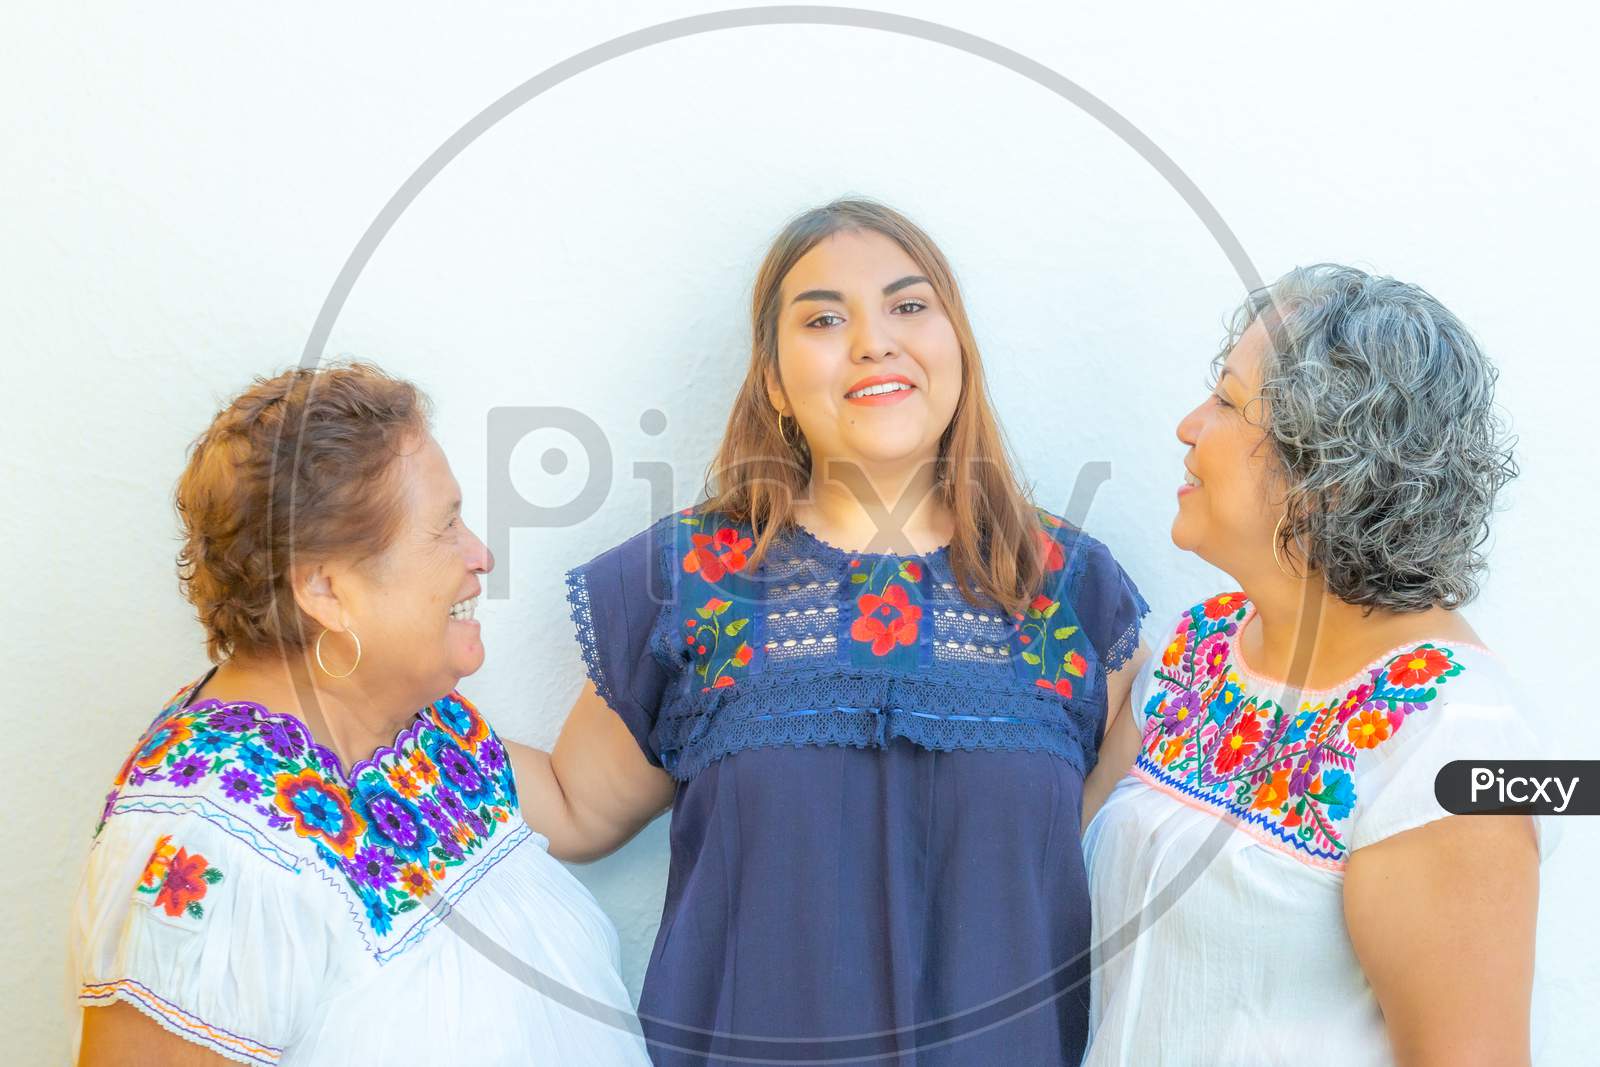 Grandmother And Mother Looking At The Granddaughter, Three Generations Of Mexican Women Smiling With Floral Print Blouses On A White Background